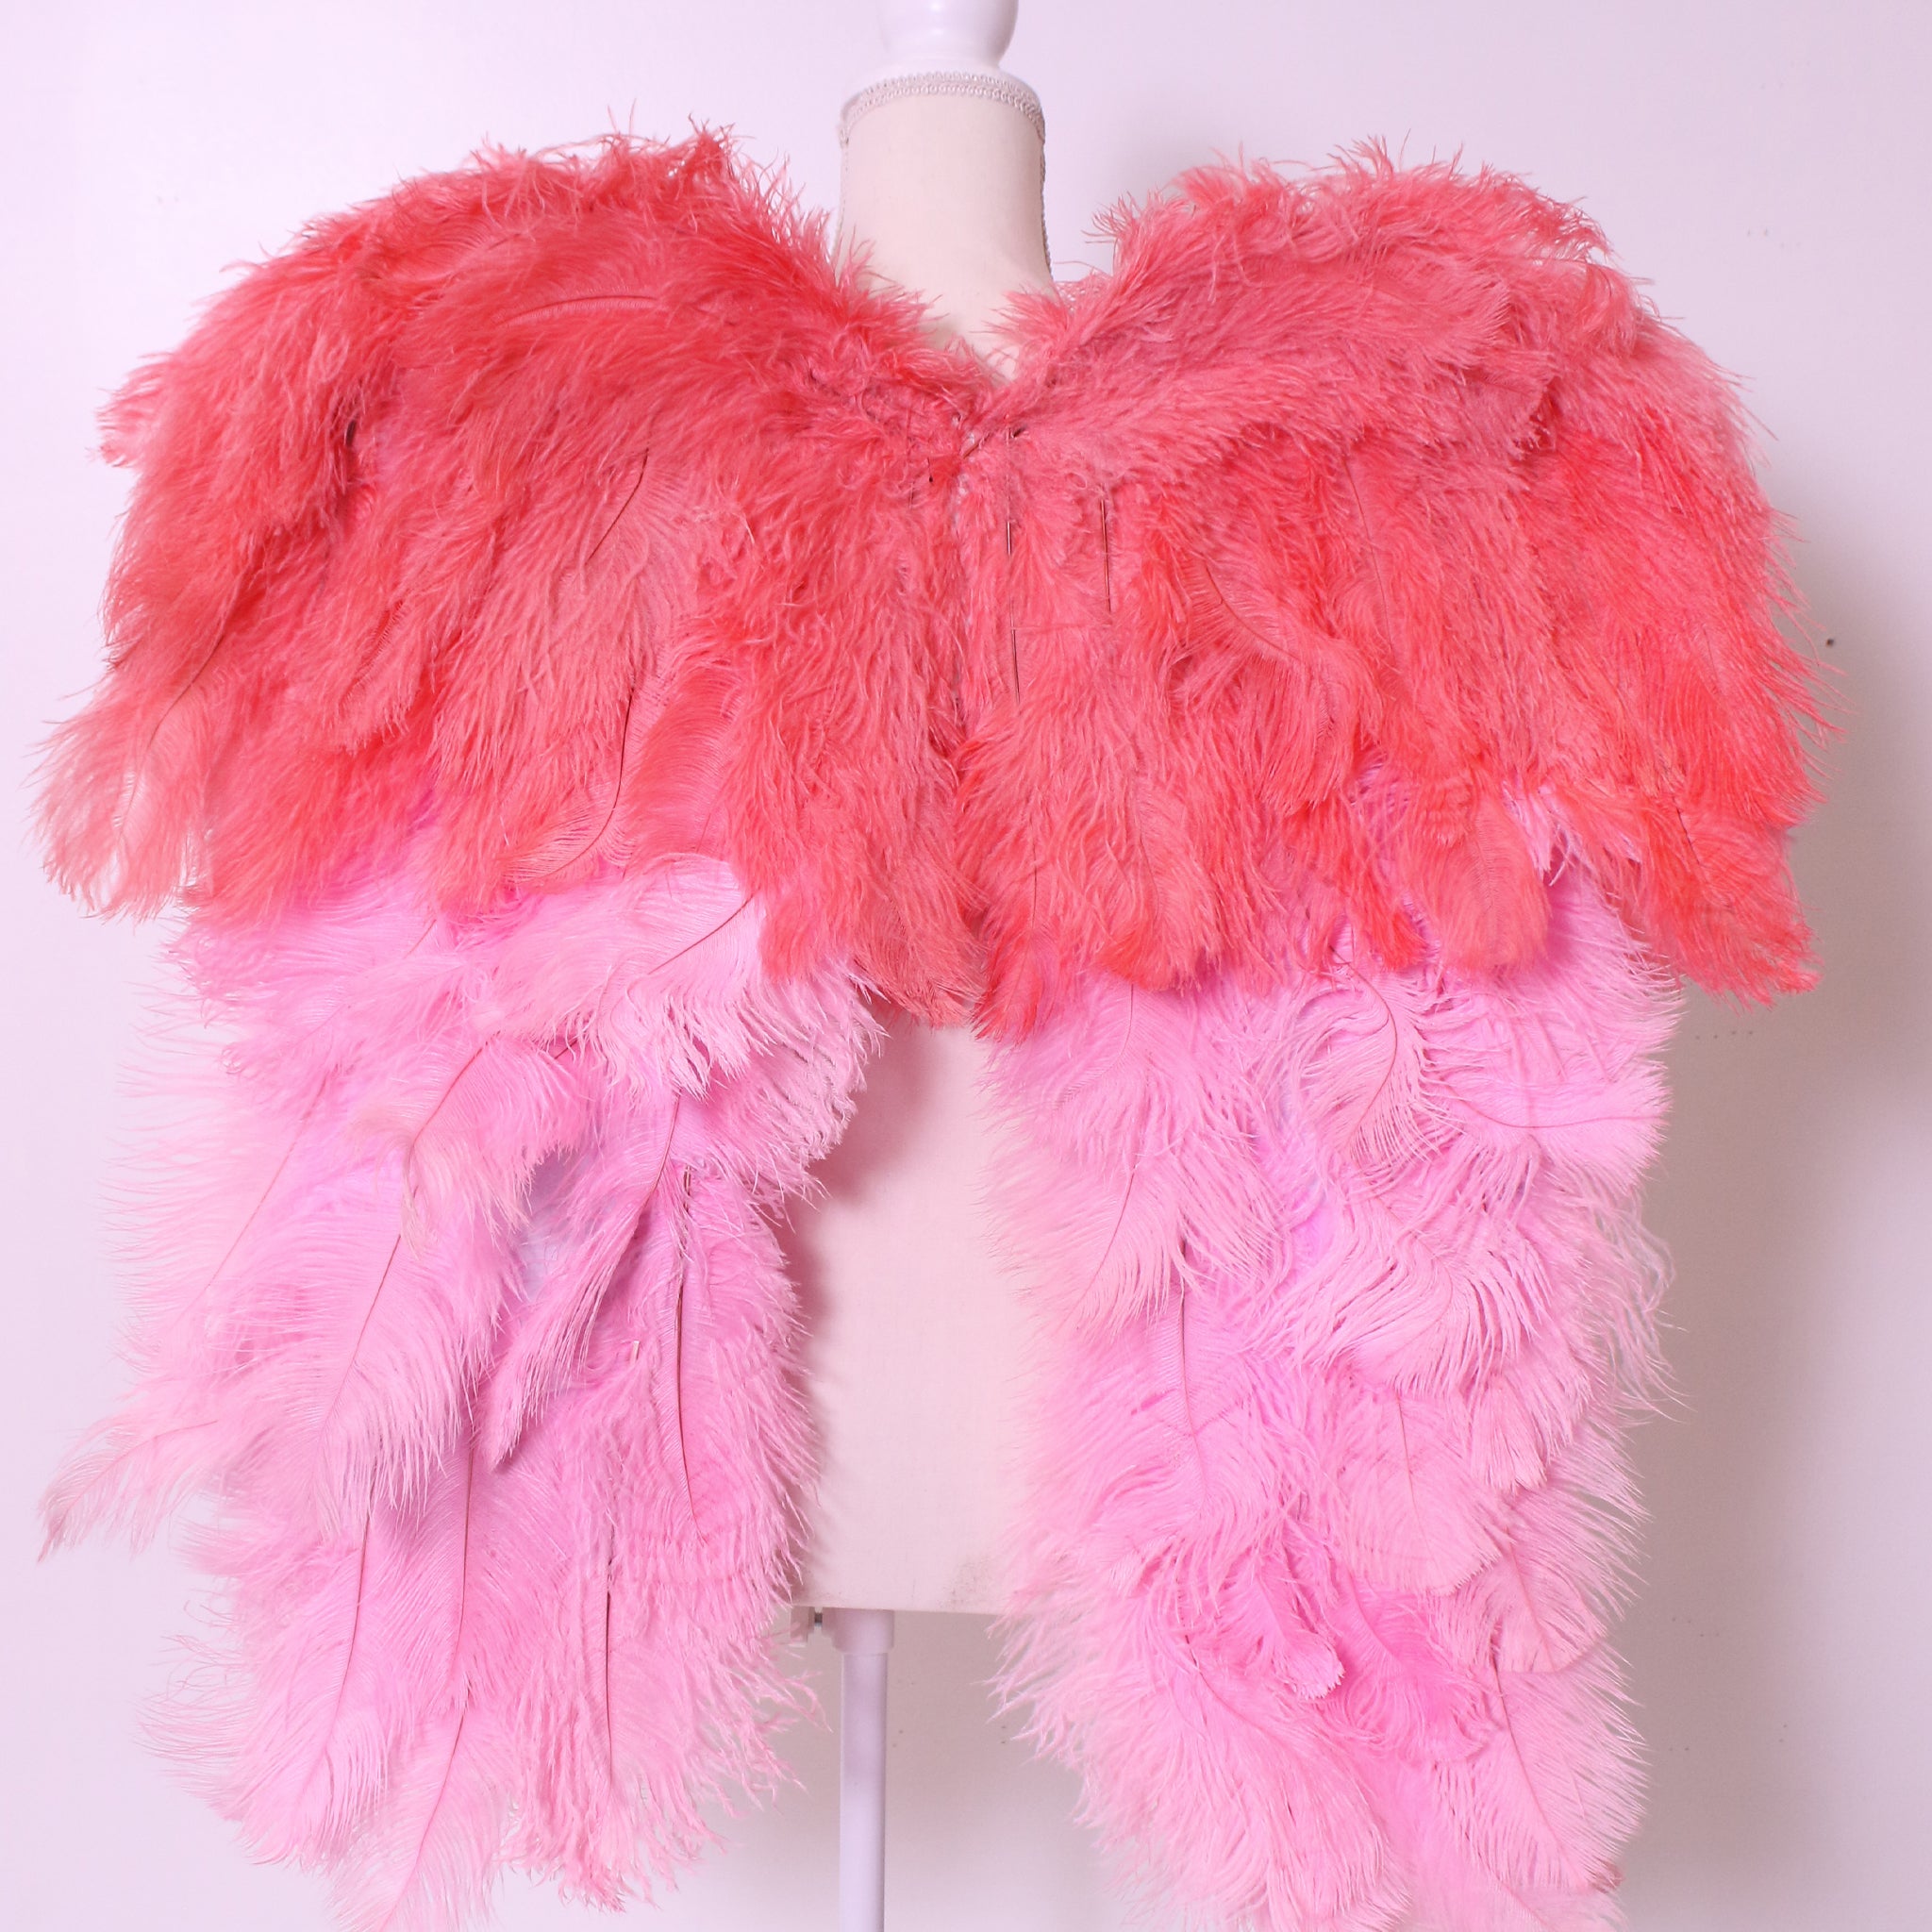 Cotton Candy Angel Wings